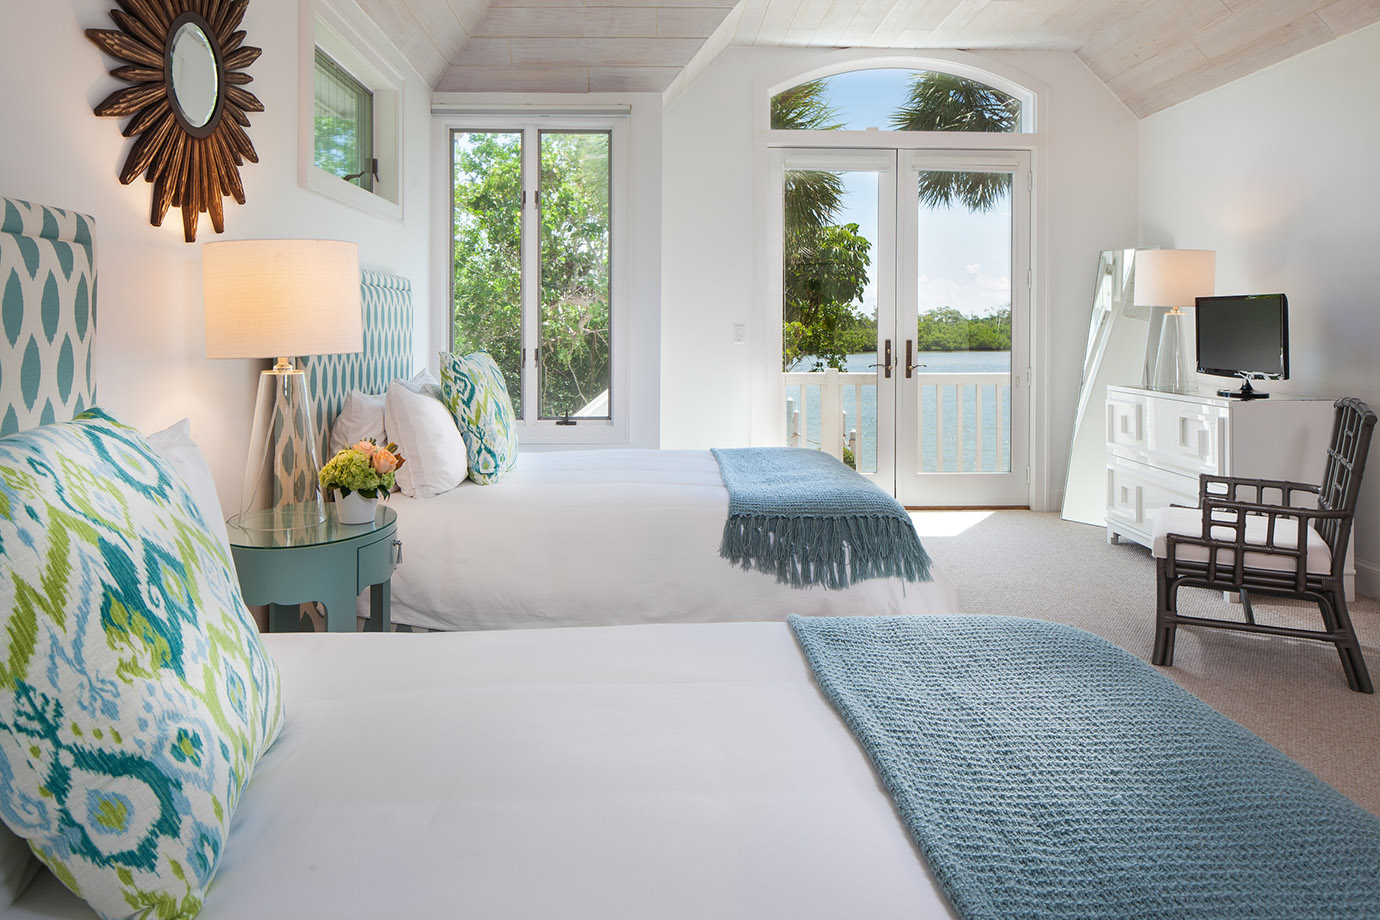 Two Queen Beds with White Linens, Colorful Pillows and Teal Quilts Overlooking Ocean with Private Deck and Television at the Sea Oats Estate in Captiva Island, FL